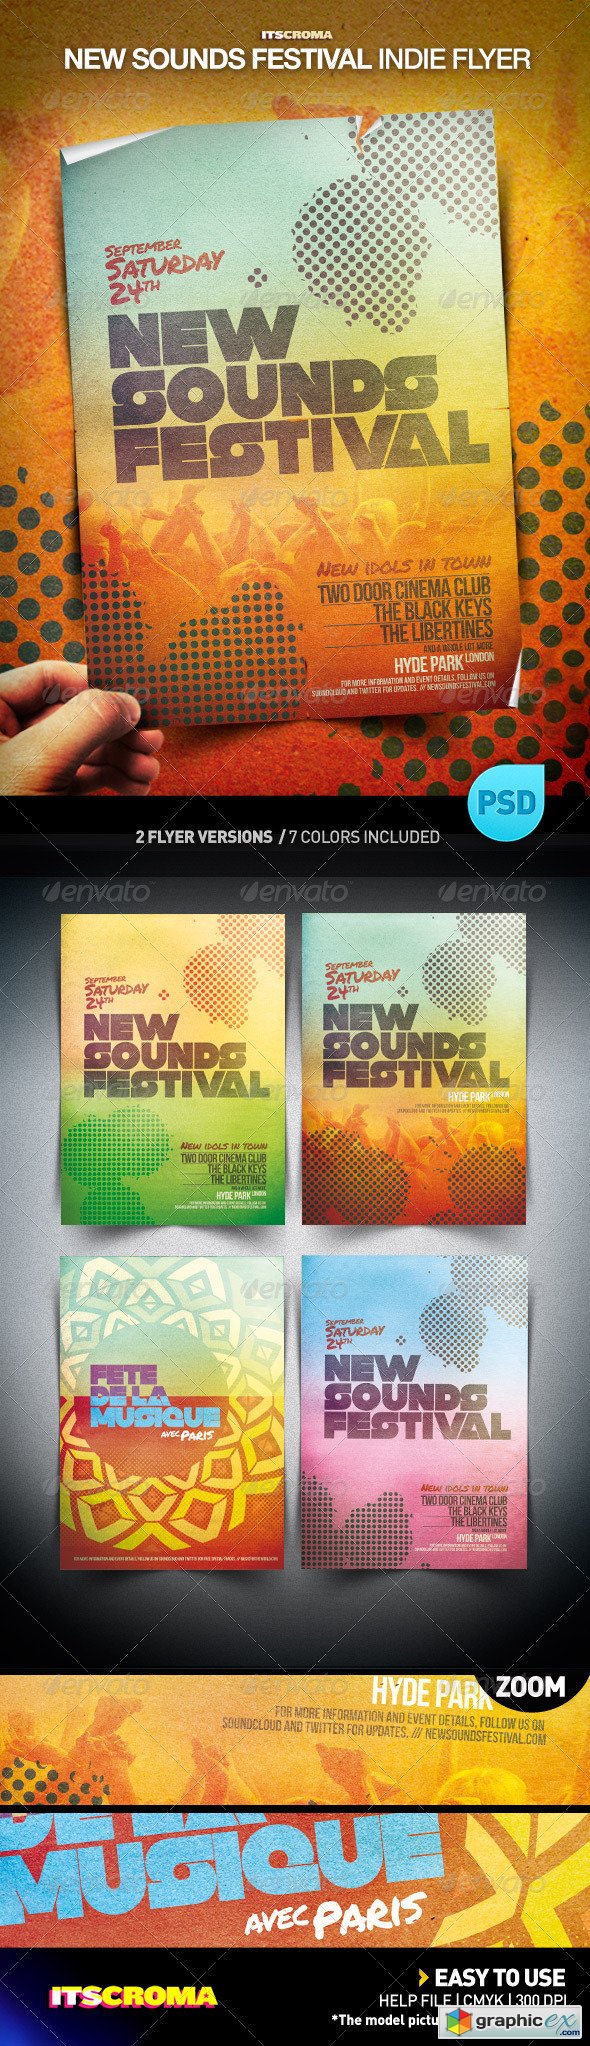 Indie Flyer Poster - New Sounds Festival